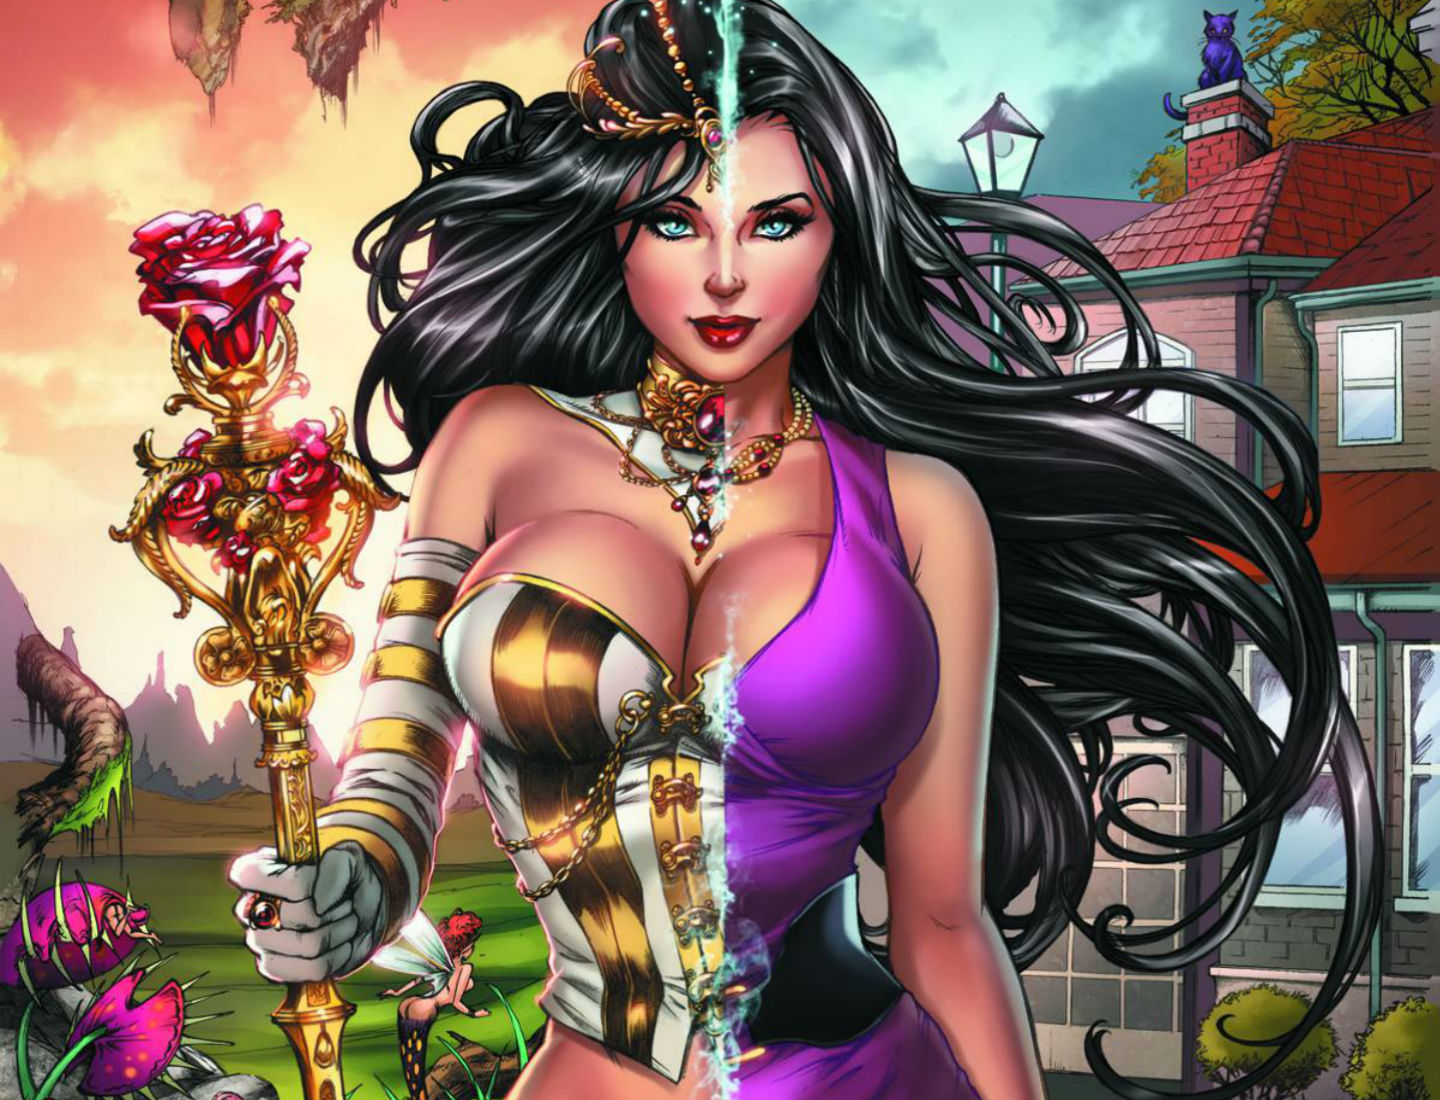 Amazing Grimm Fairy Tales: Alice In Wonderland Pictures & Backgrounds